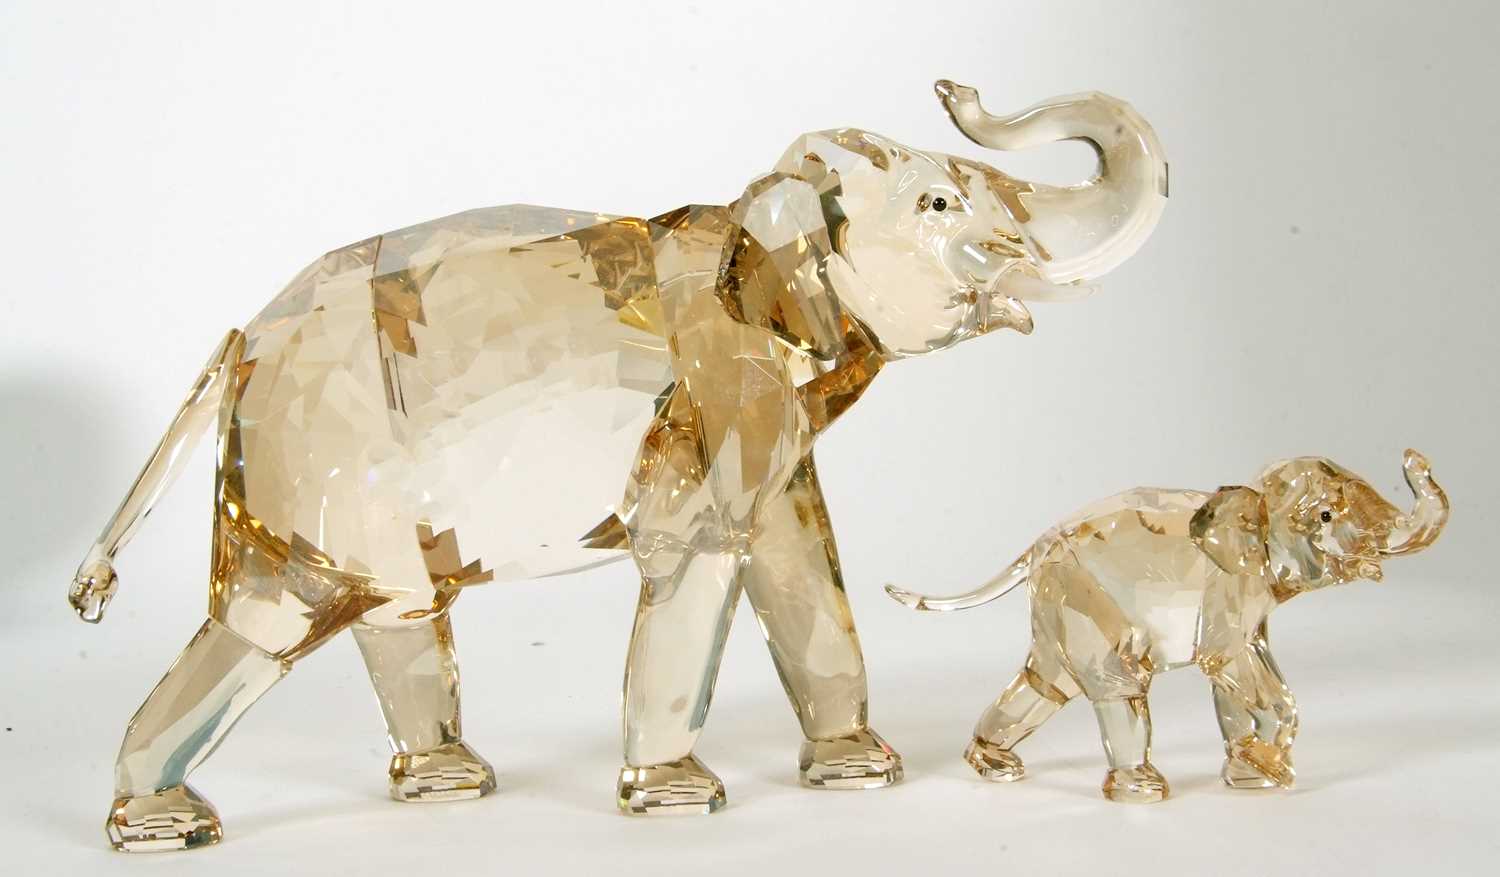 A Swarovski SCS annual edition figure of Cinta elephant together with a baby elephant, 2013, with - Image 8 of 11